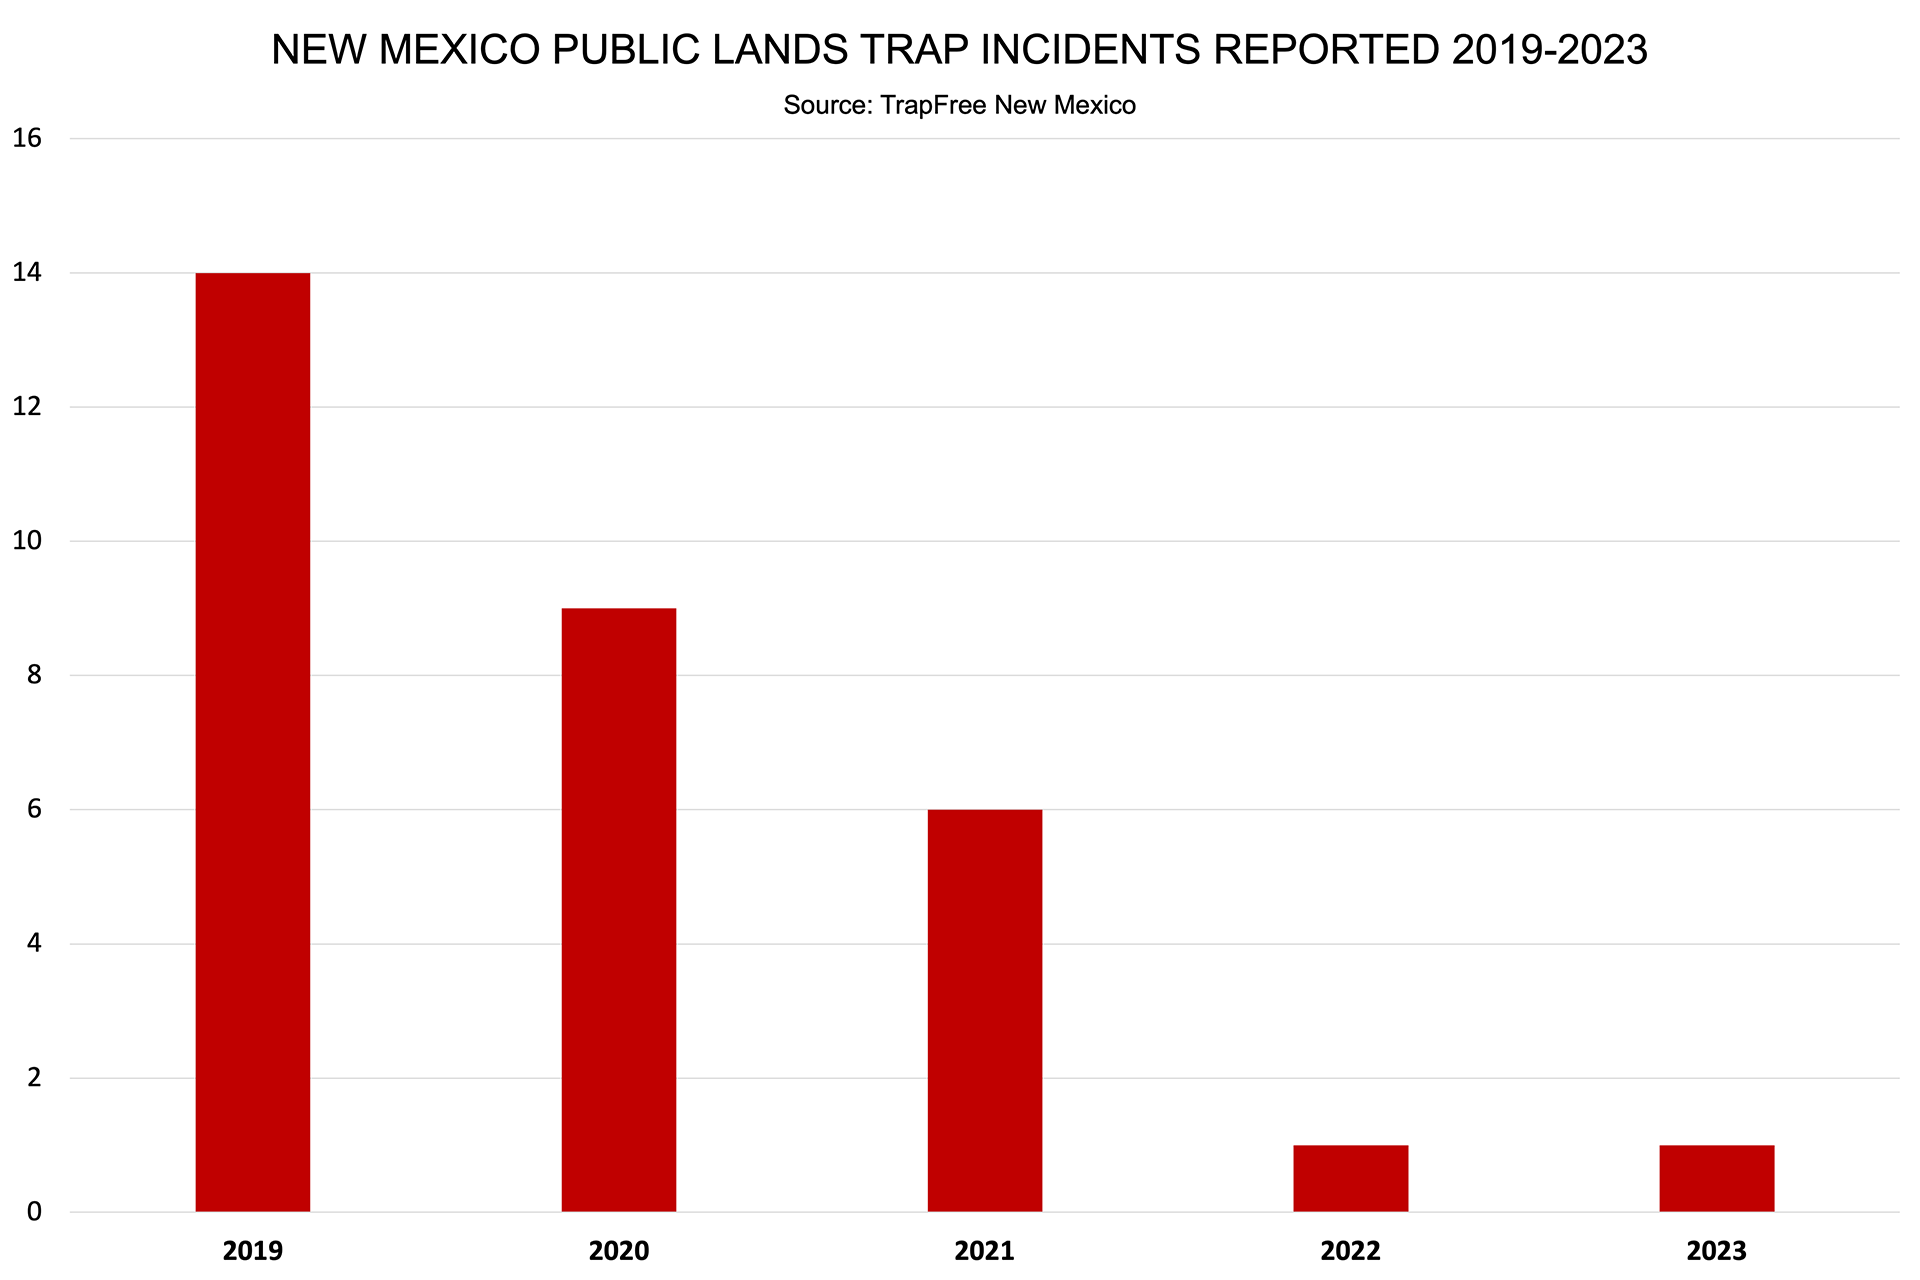 Roxy’s Law is working! New Mexico Public Lands Trap Incidents Reported 2019-2023